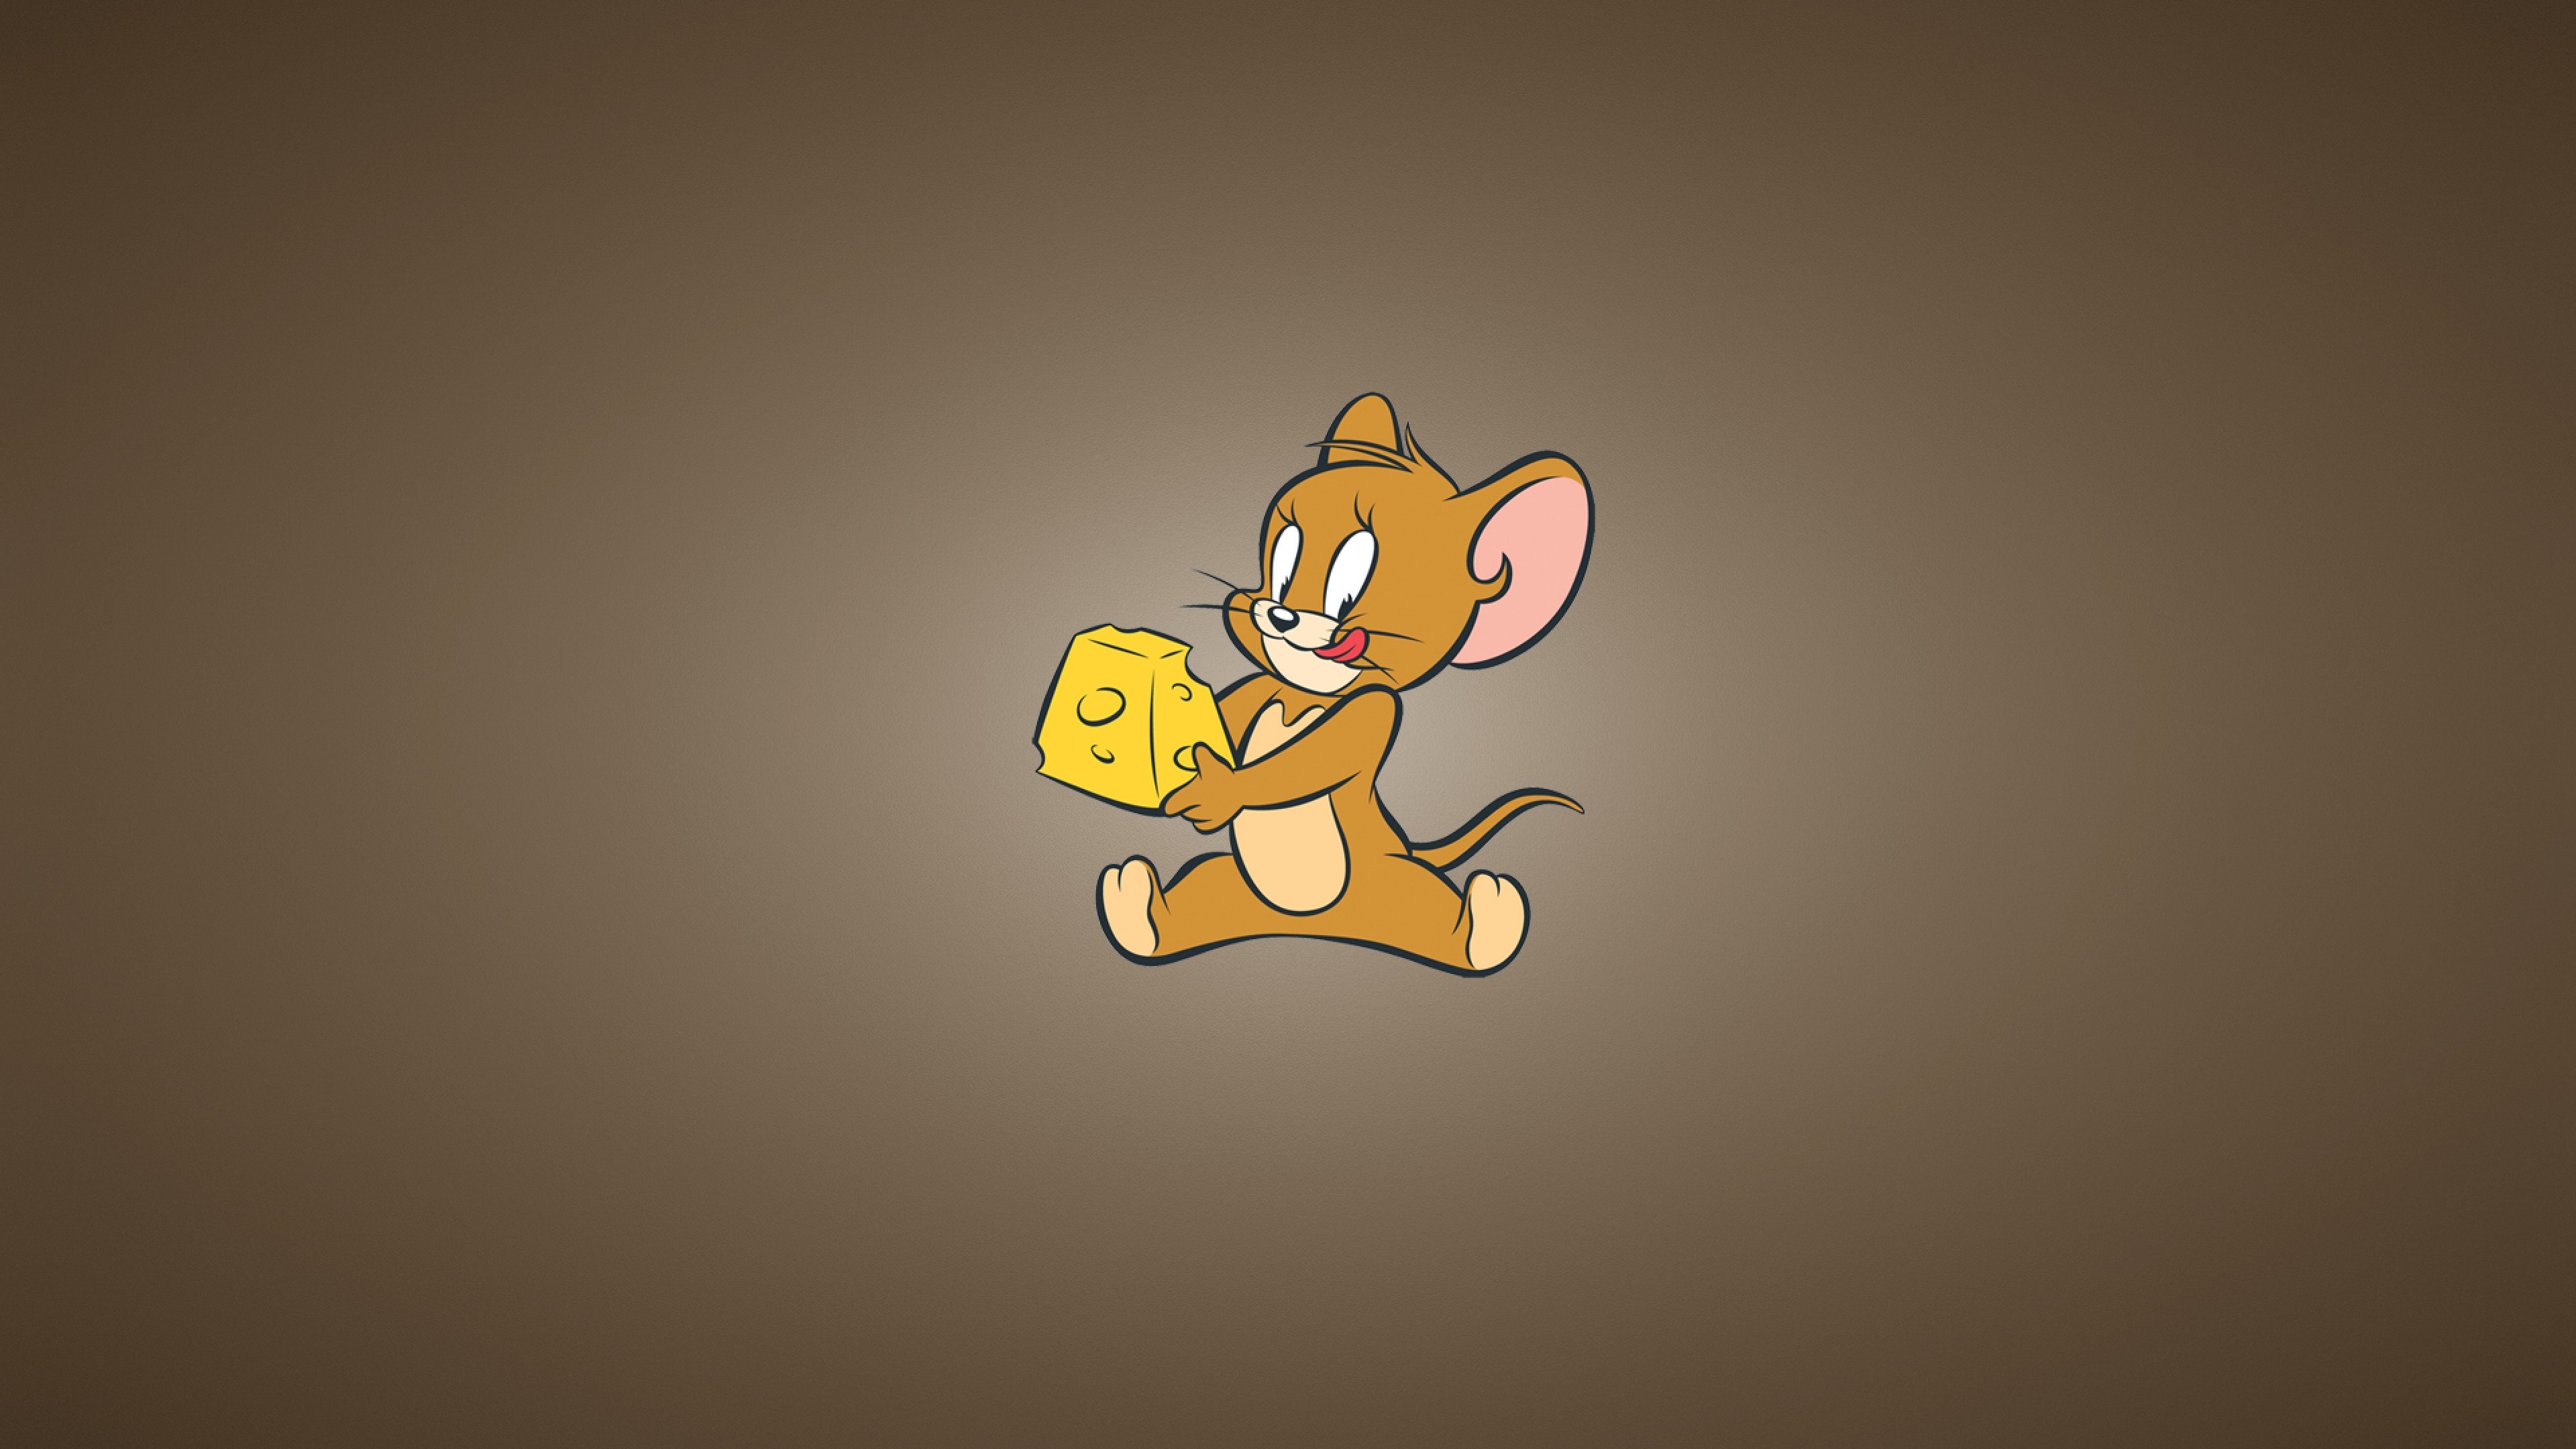 HD wallpaper, 3840X2160 4K Desktop, Eye Catching Wallpaper, High Definition, Animated Fun, Tom And Jerry 1280X1024, Desktop 4K Tom And Jerry Background Photo